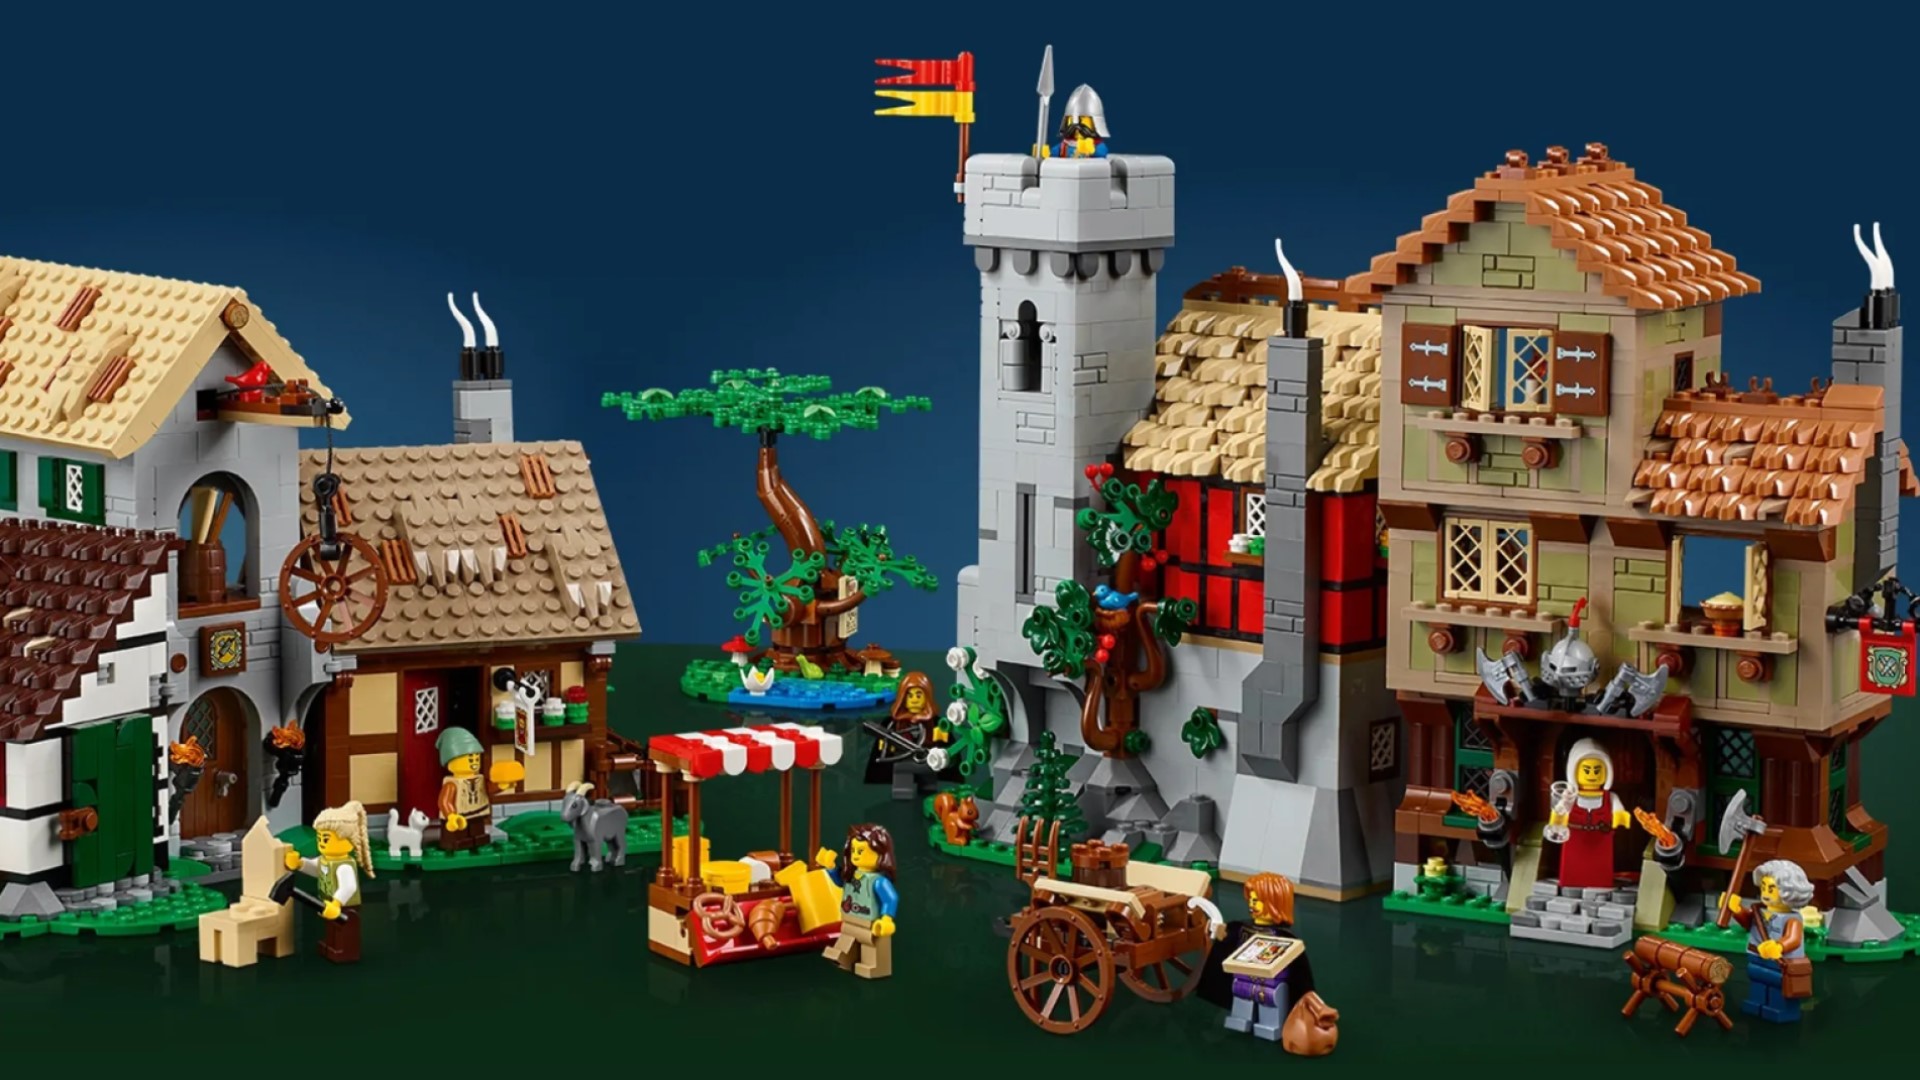 Lego Medieval Town has guards, cheesemakers, and an $80 goat